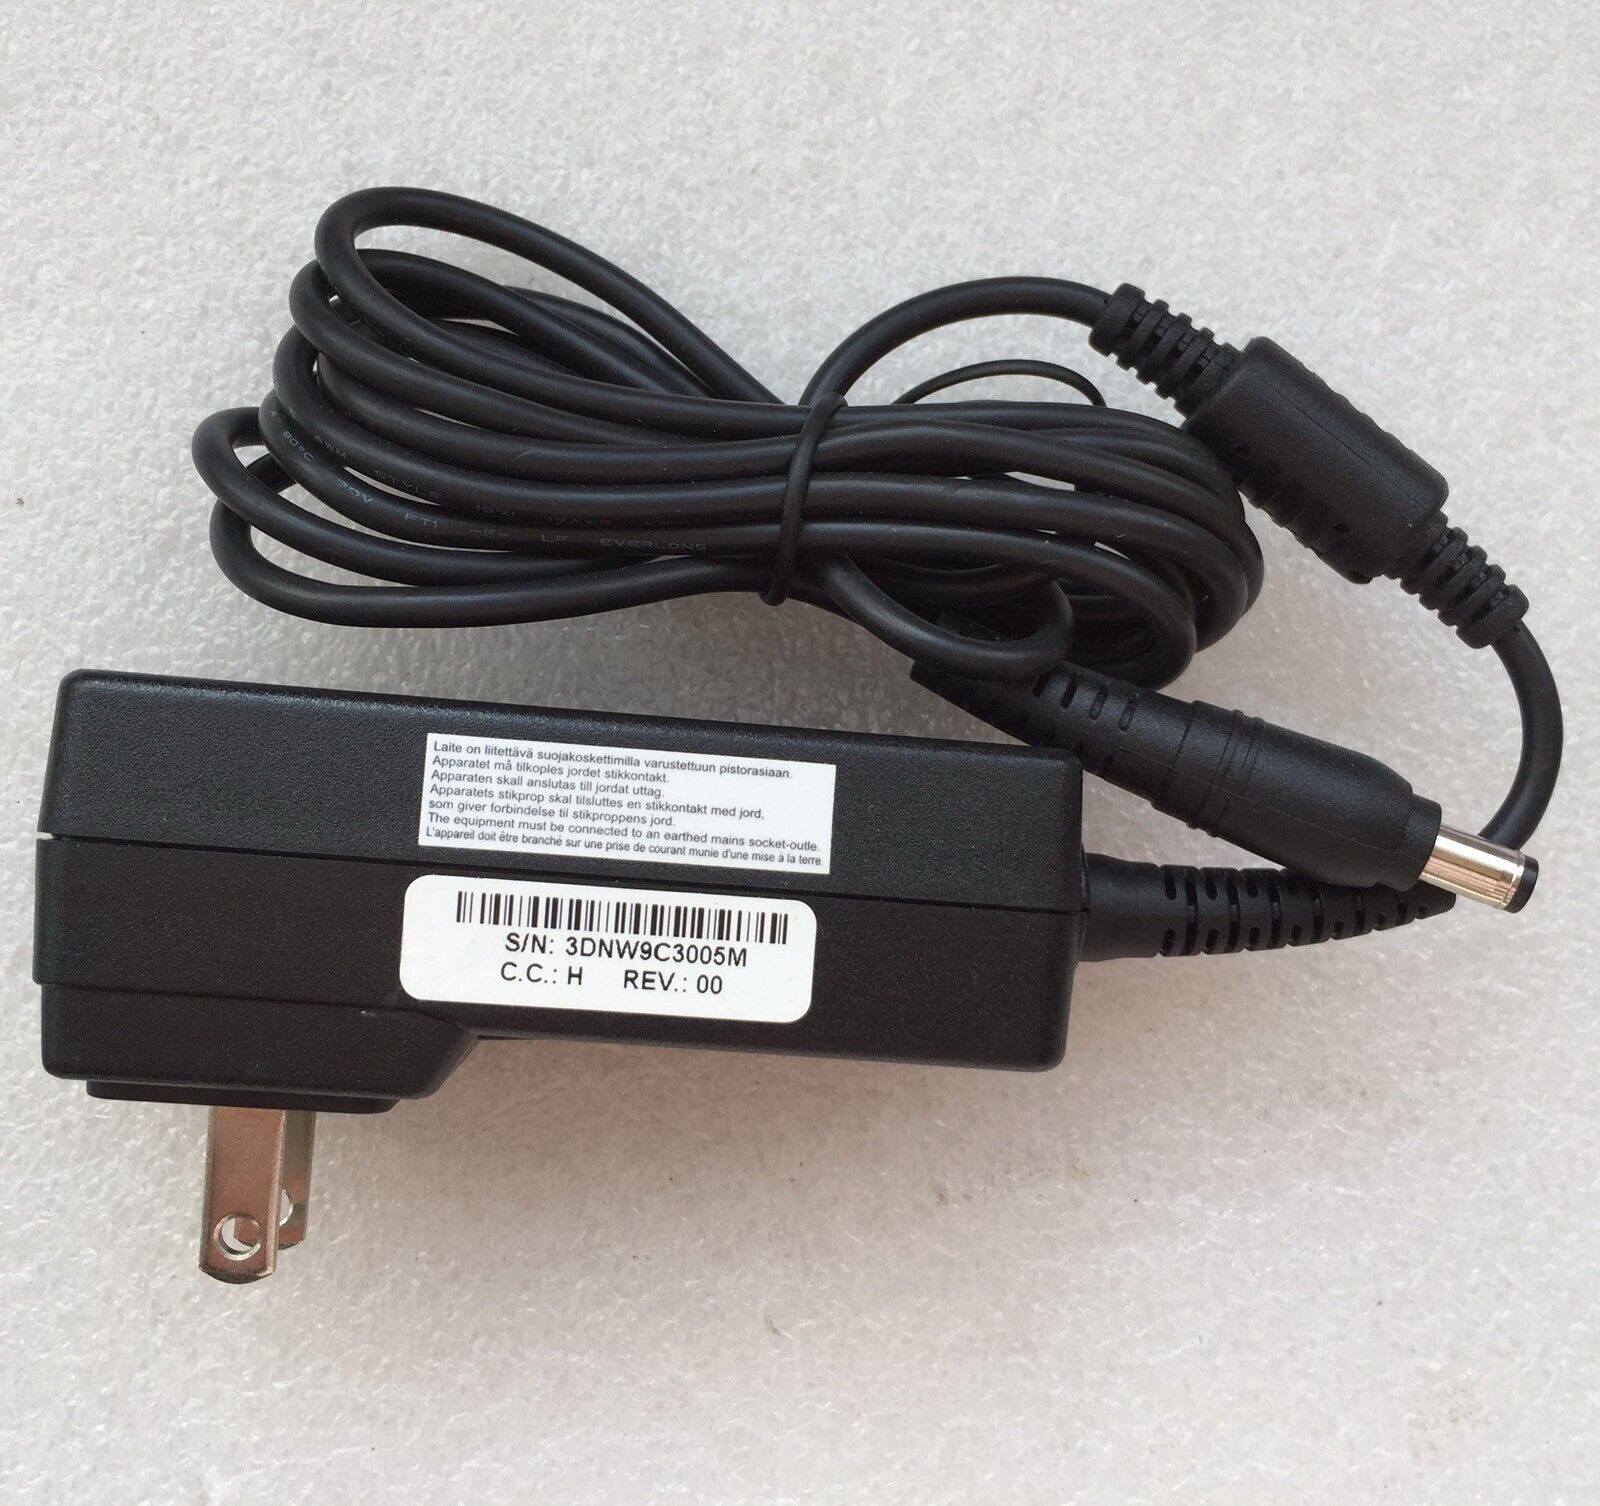 *Brand NEW*UK PLUG FOR For HB-DC12V6W / Jump Start Booster 12V AC/DC ADAPTER POWER SUPPLY